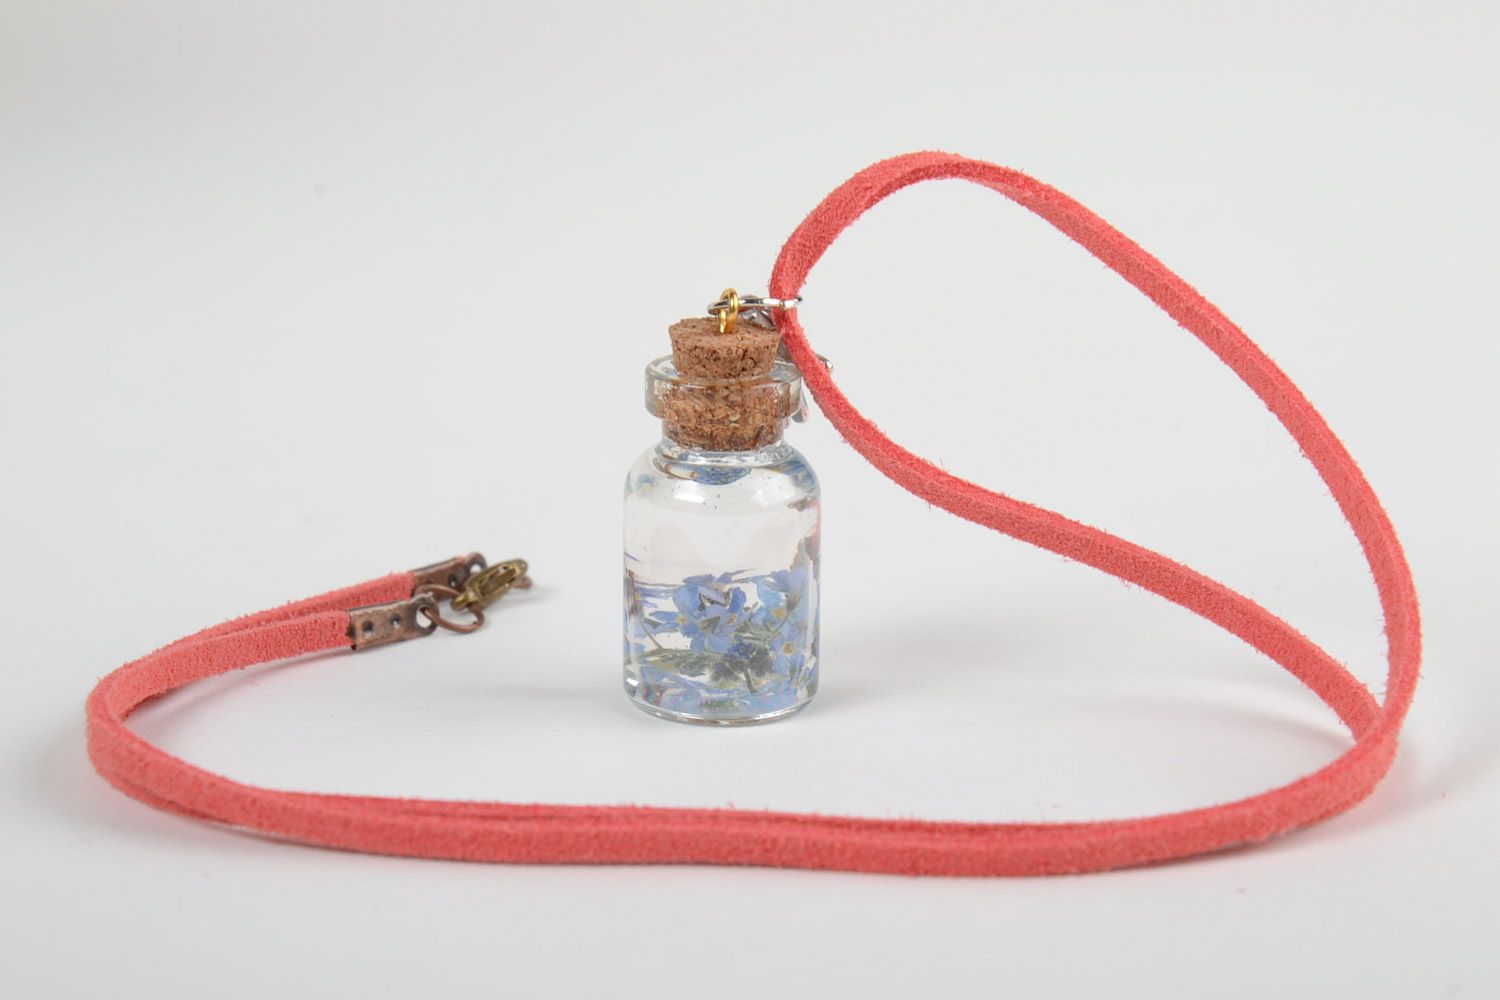 Homemade epoxy resin botanical pendant with cord Vial with flowers inside photo 4